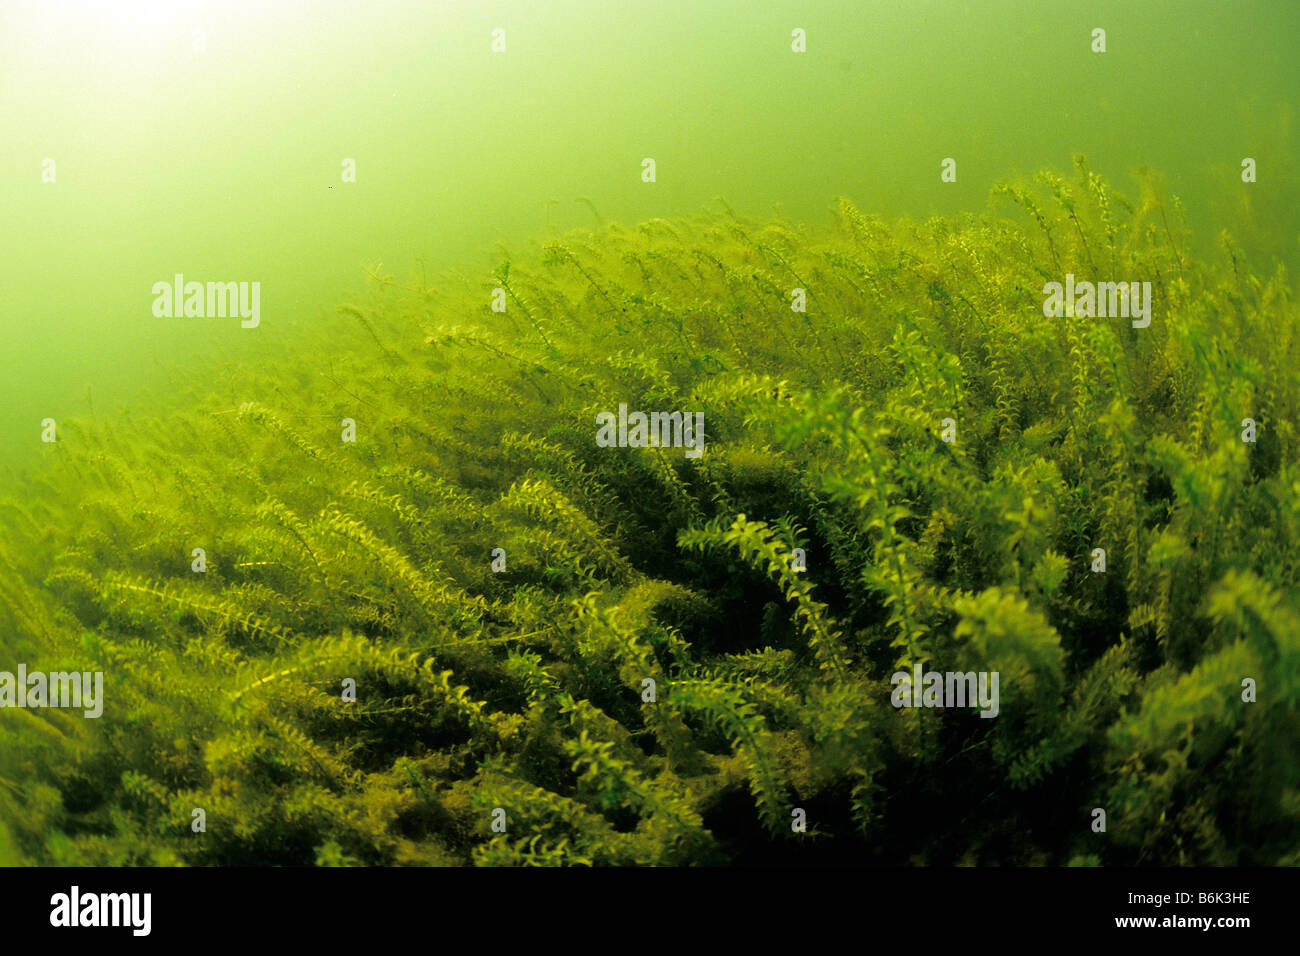 Canadian Water Weed (Elodea canadensis),  plants under water Stock Photo